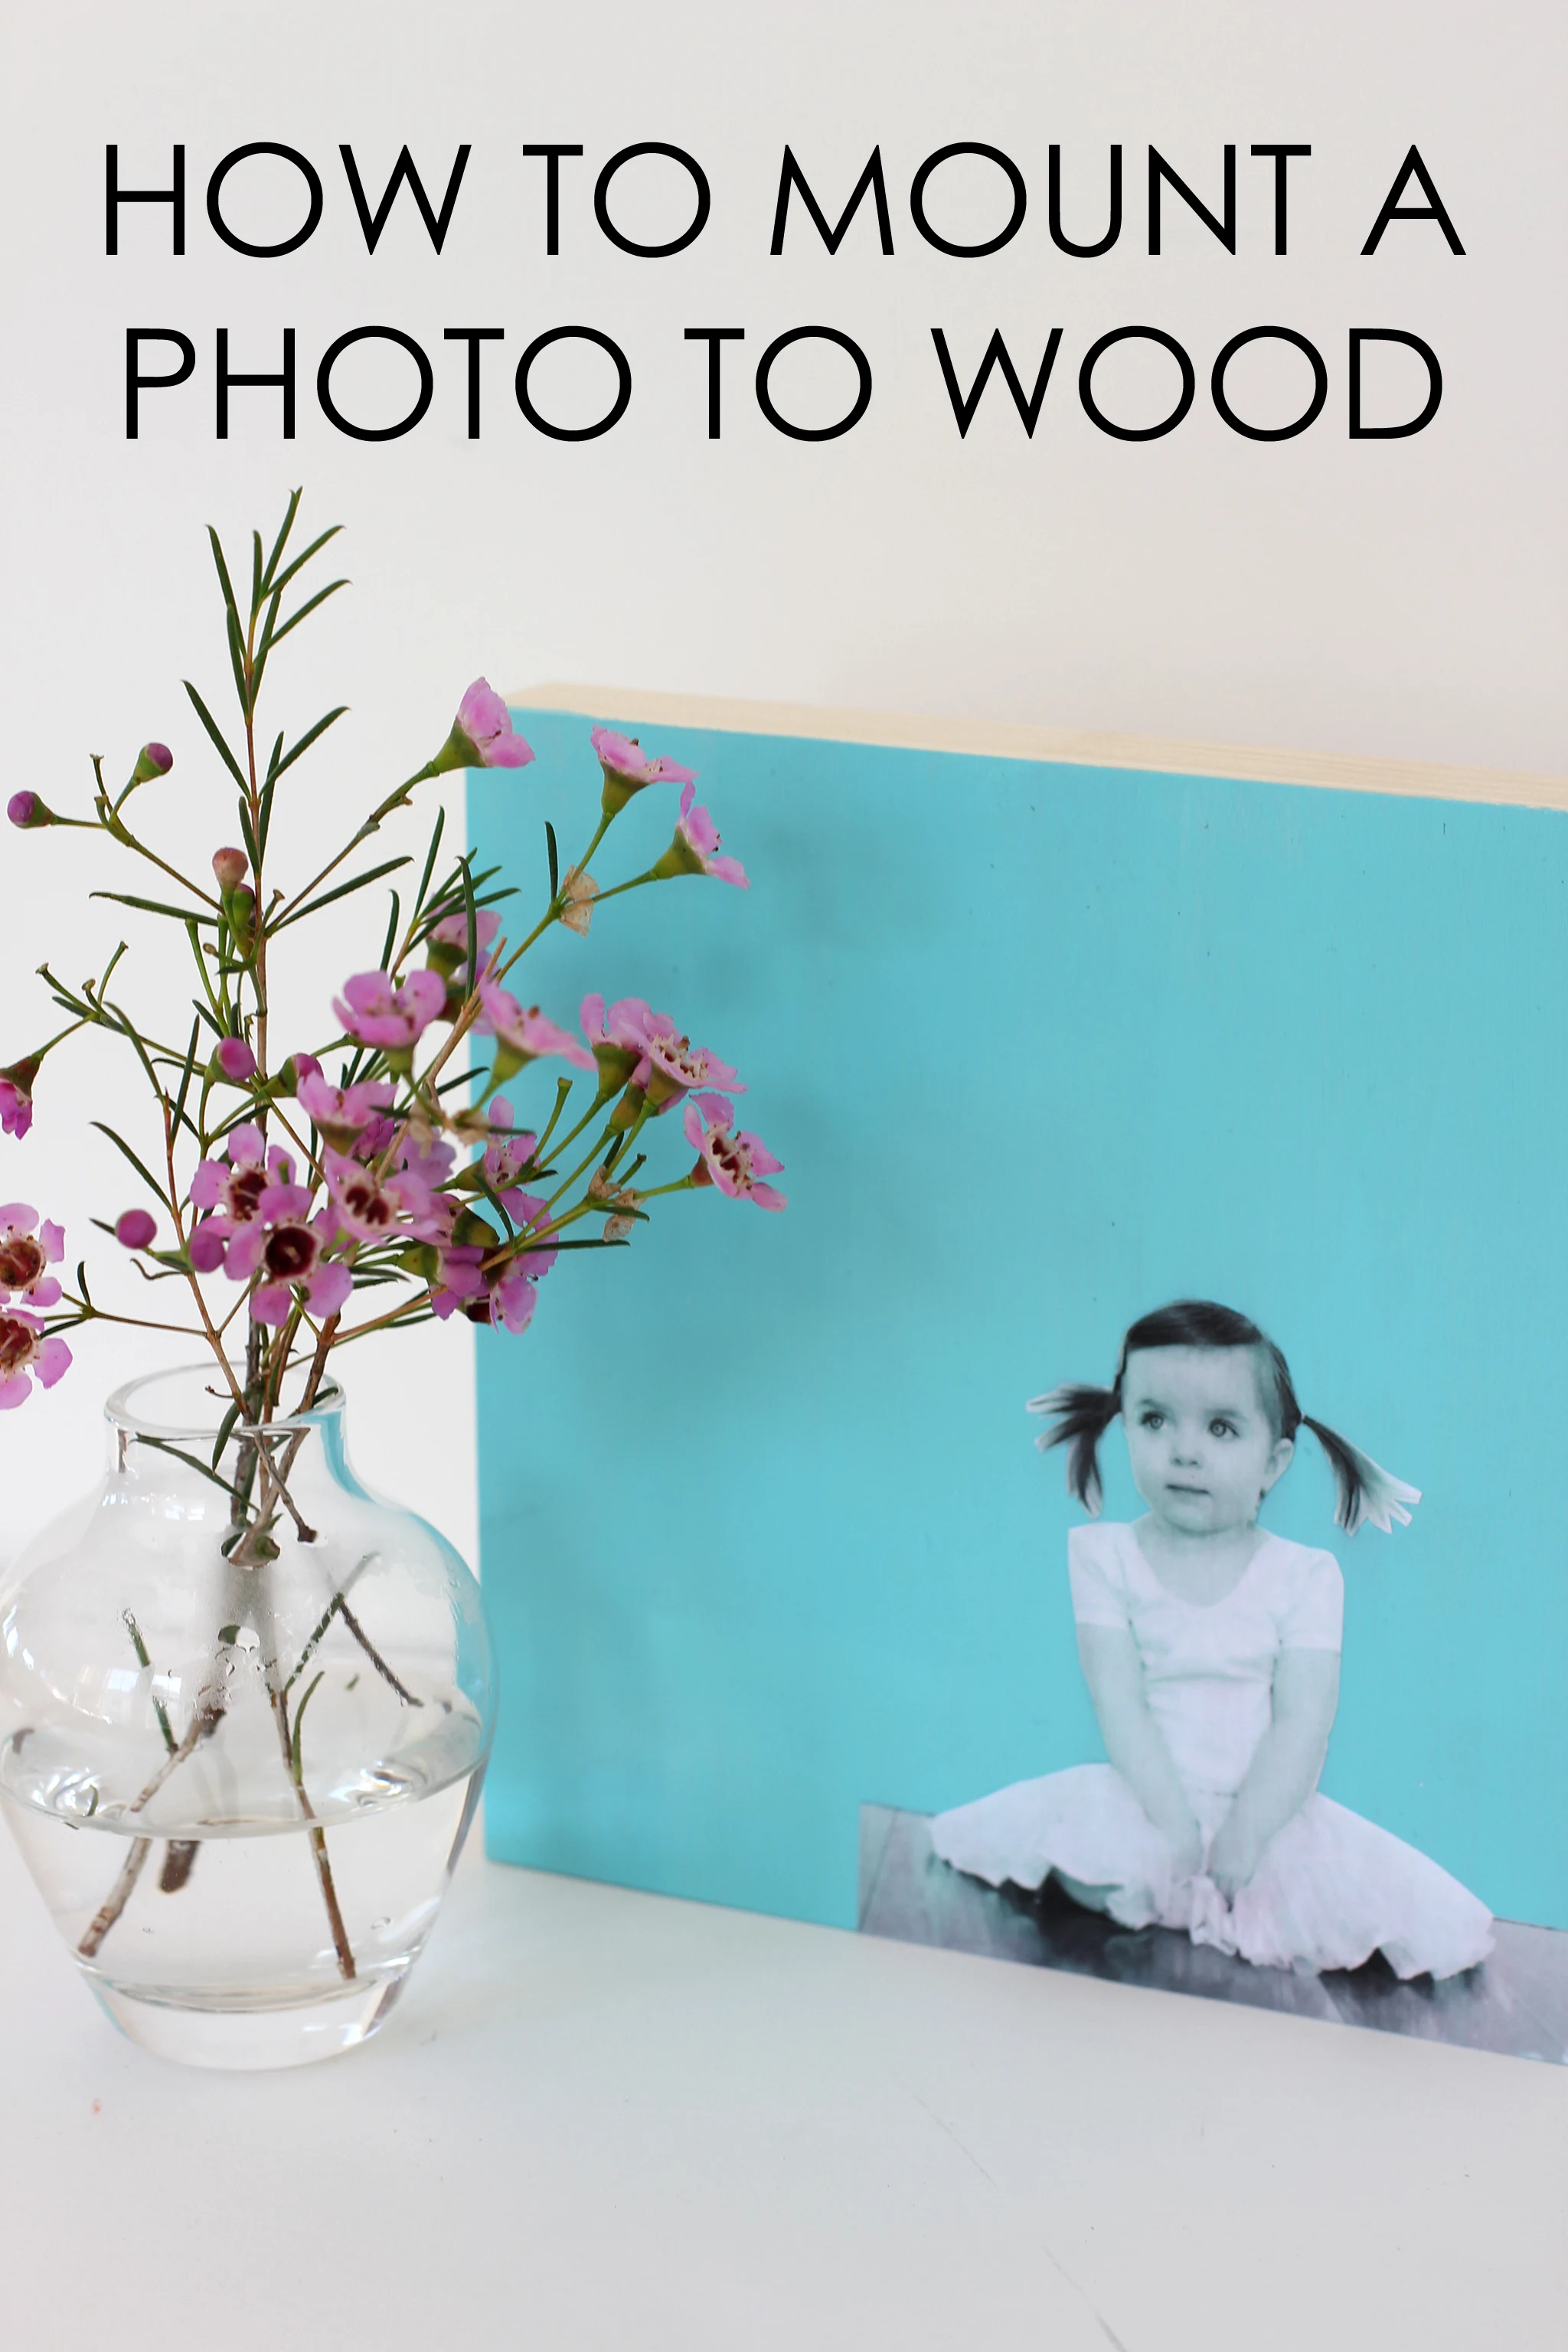 21 DIY Wood Gifts For Dads - Last-Minute Ideas | Anika's DIY Life